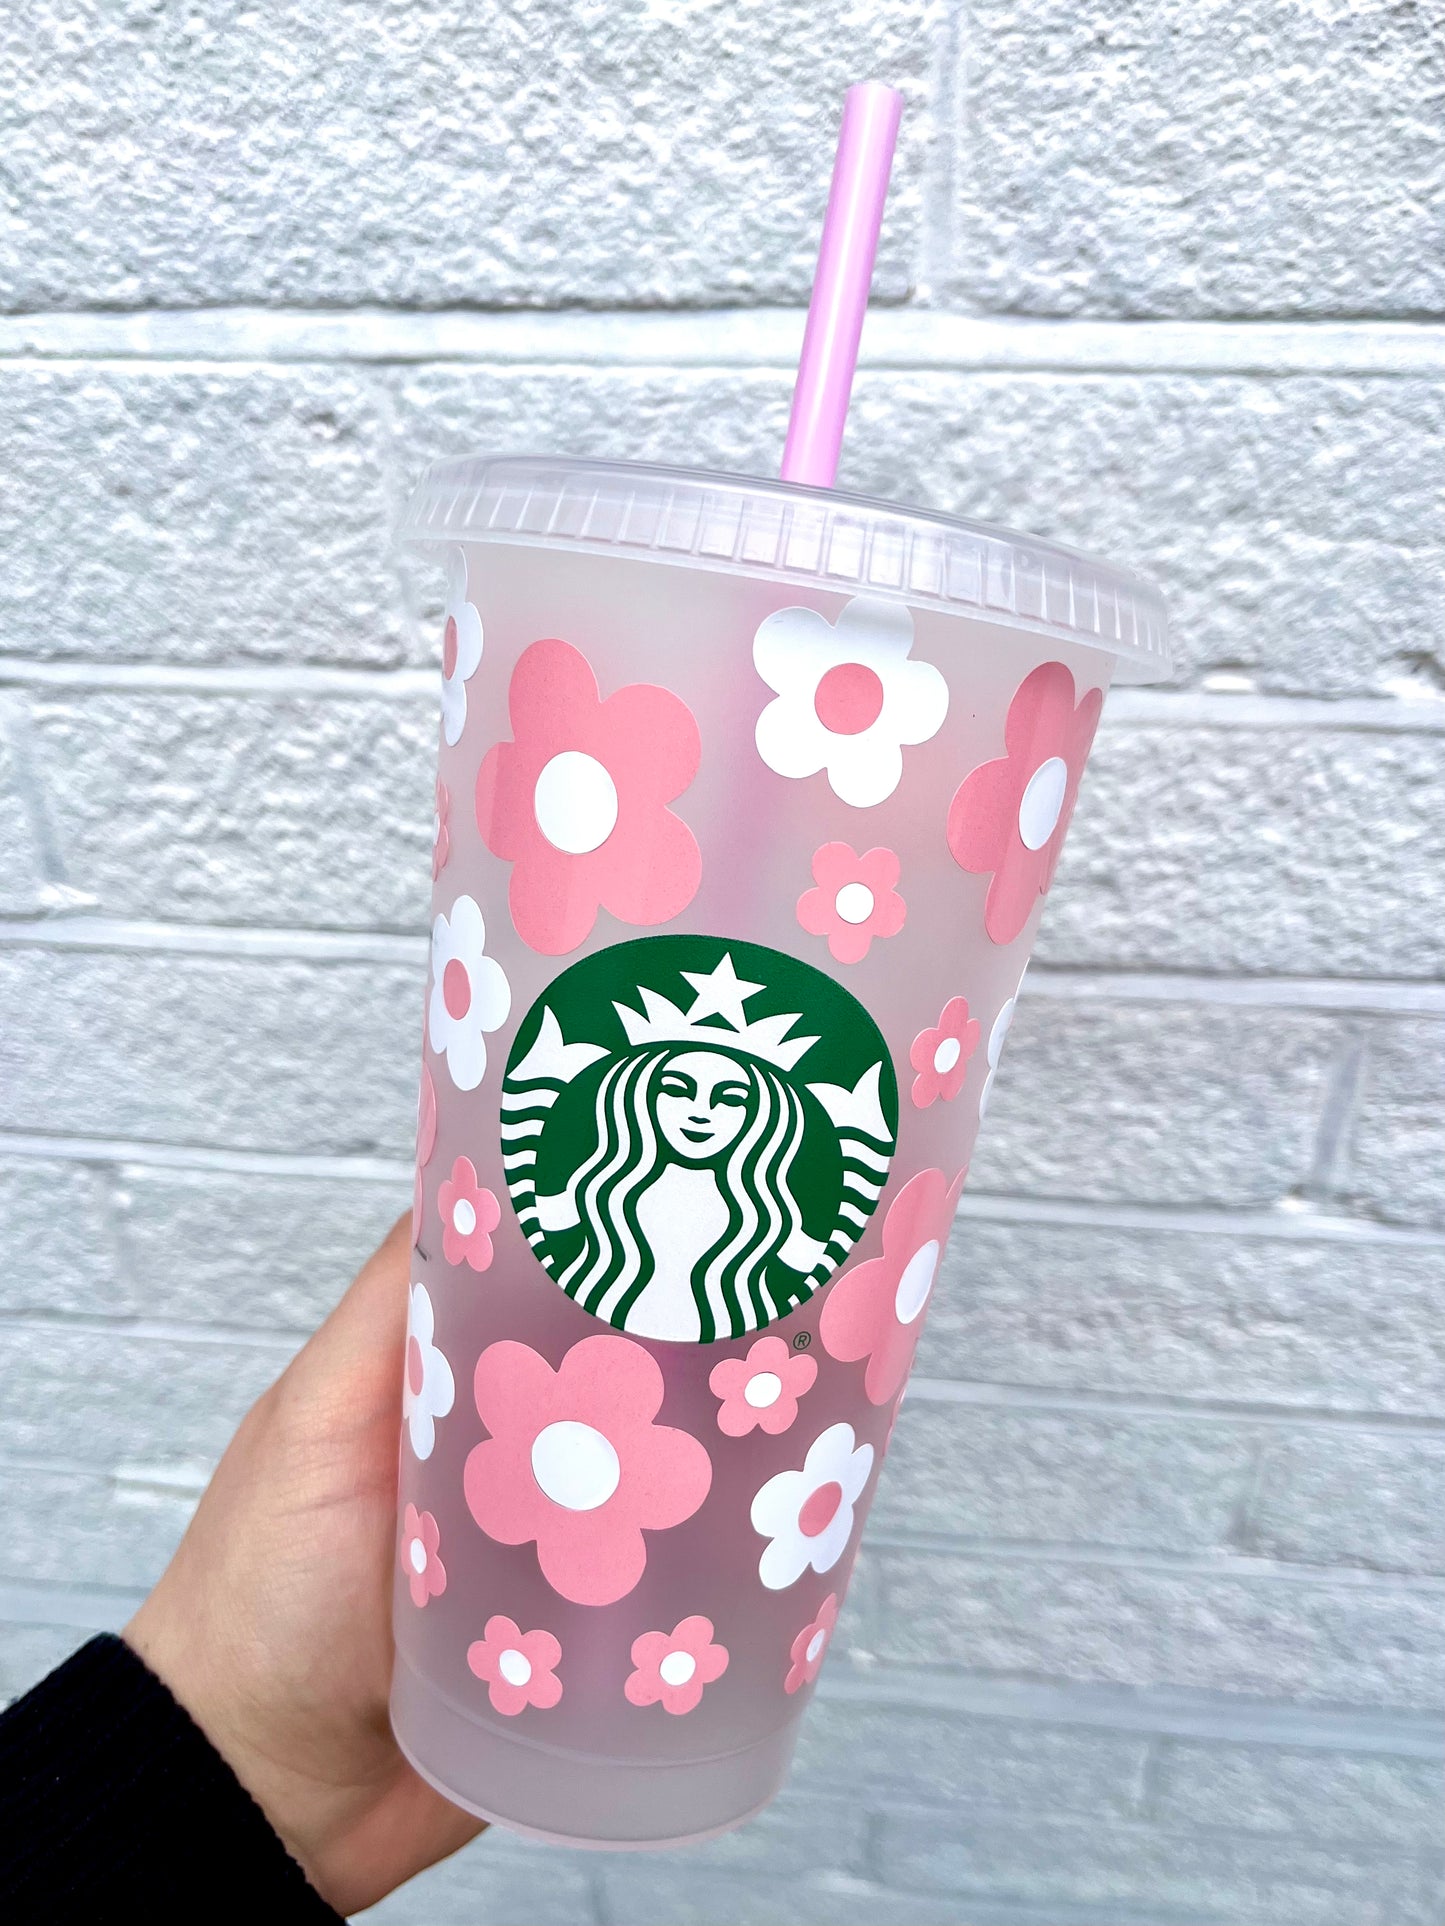 Starbucks Cold Cup With Pink Retro Flowers Design